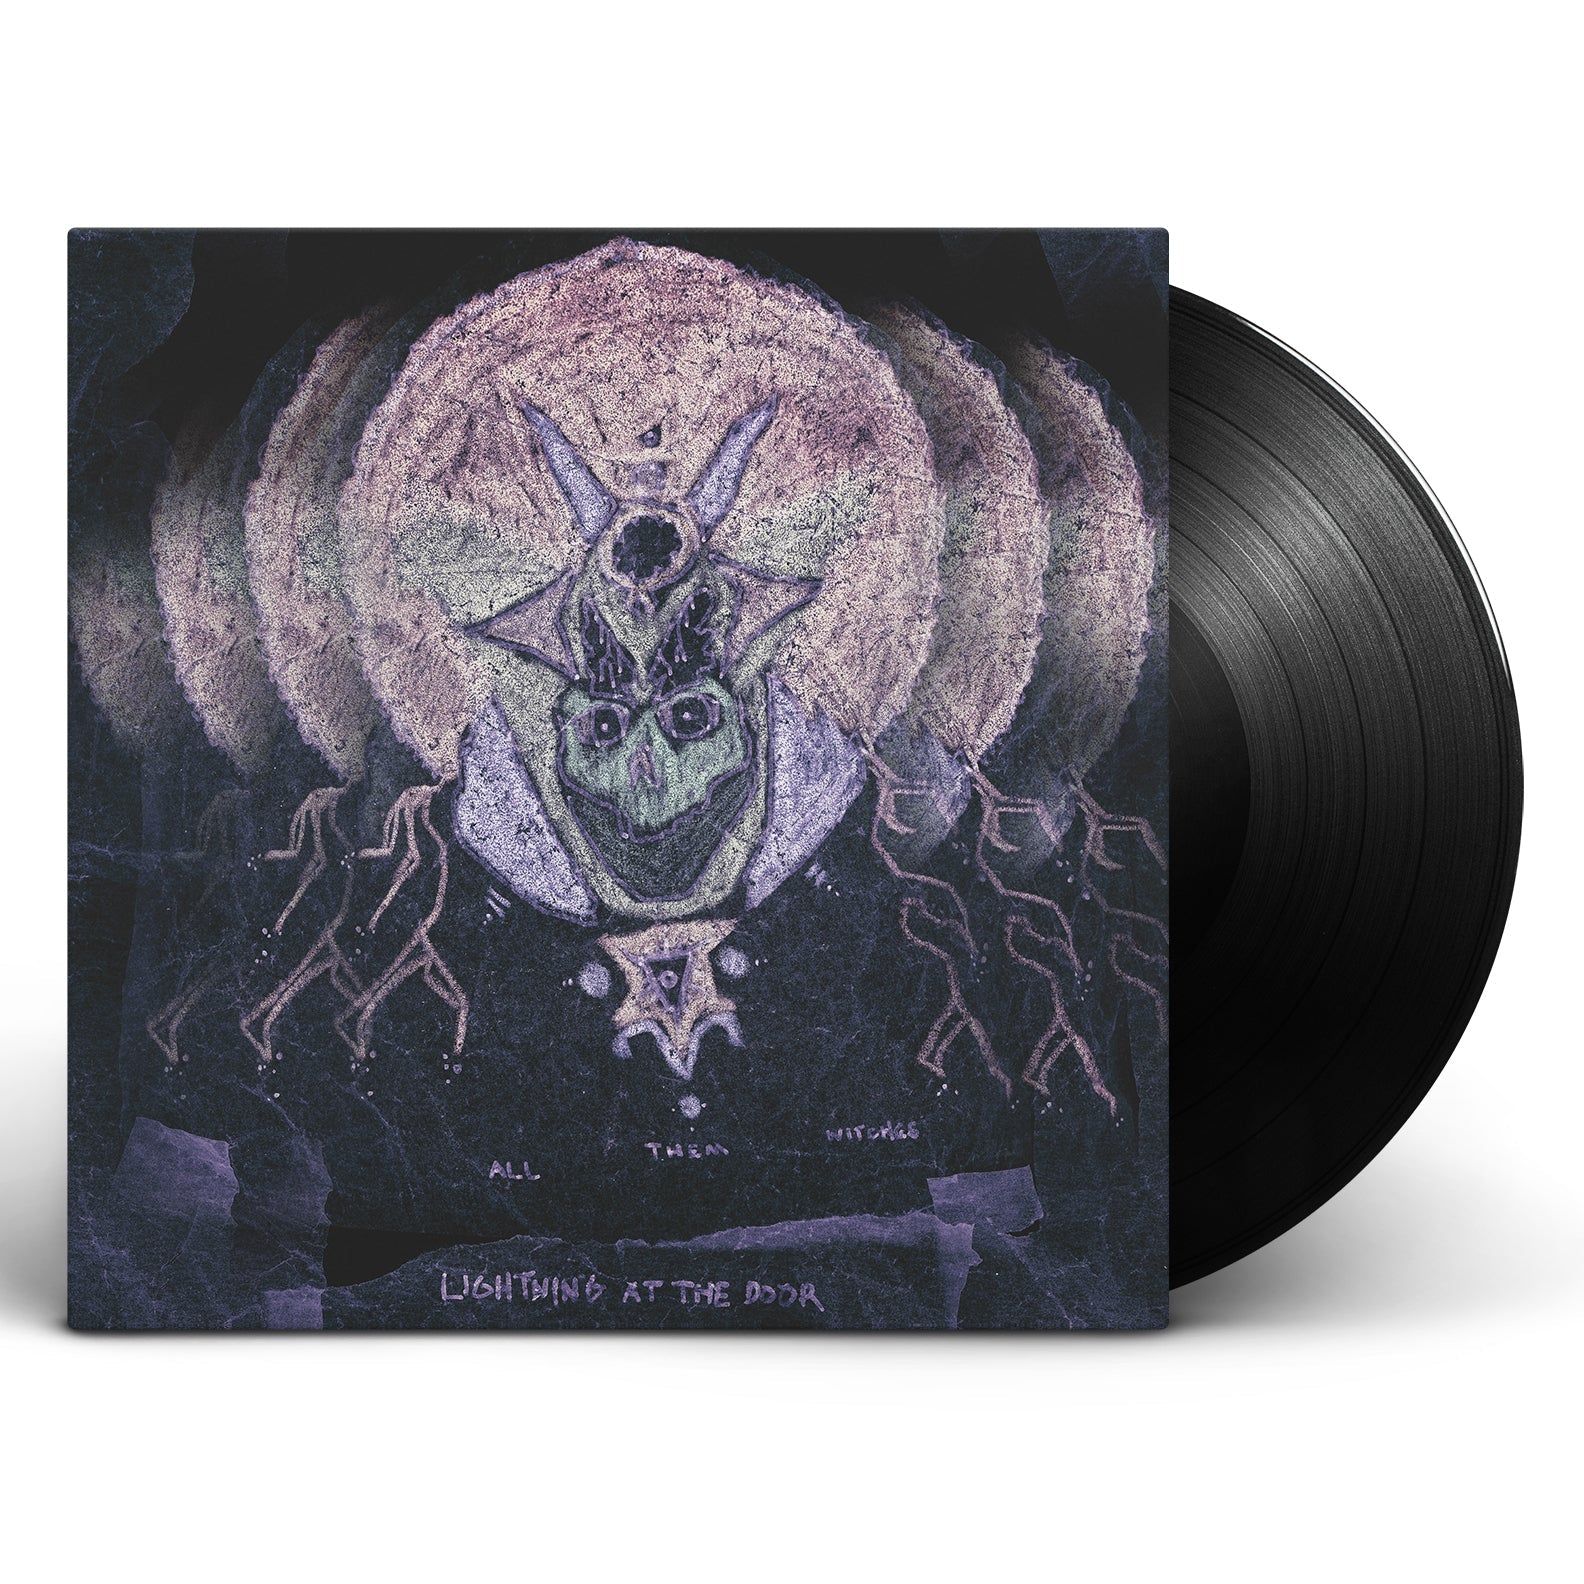 All Them Witches - Lightning At The Door [Vinyl]